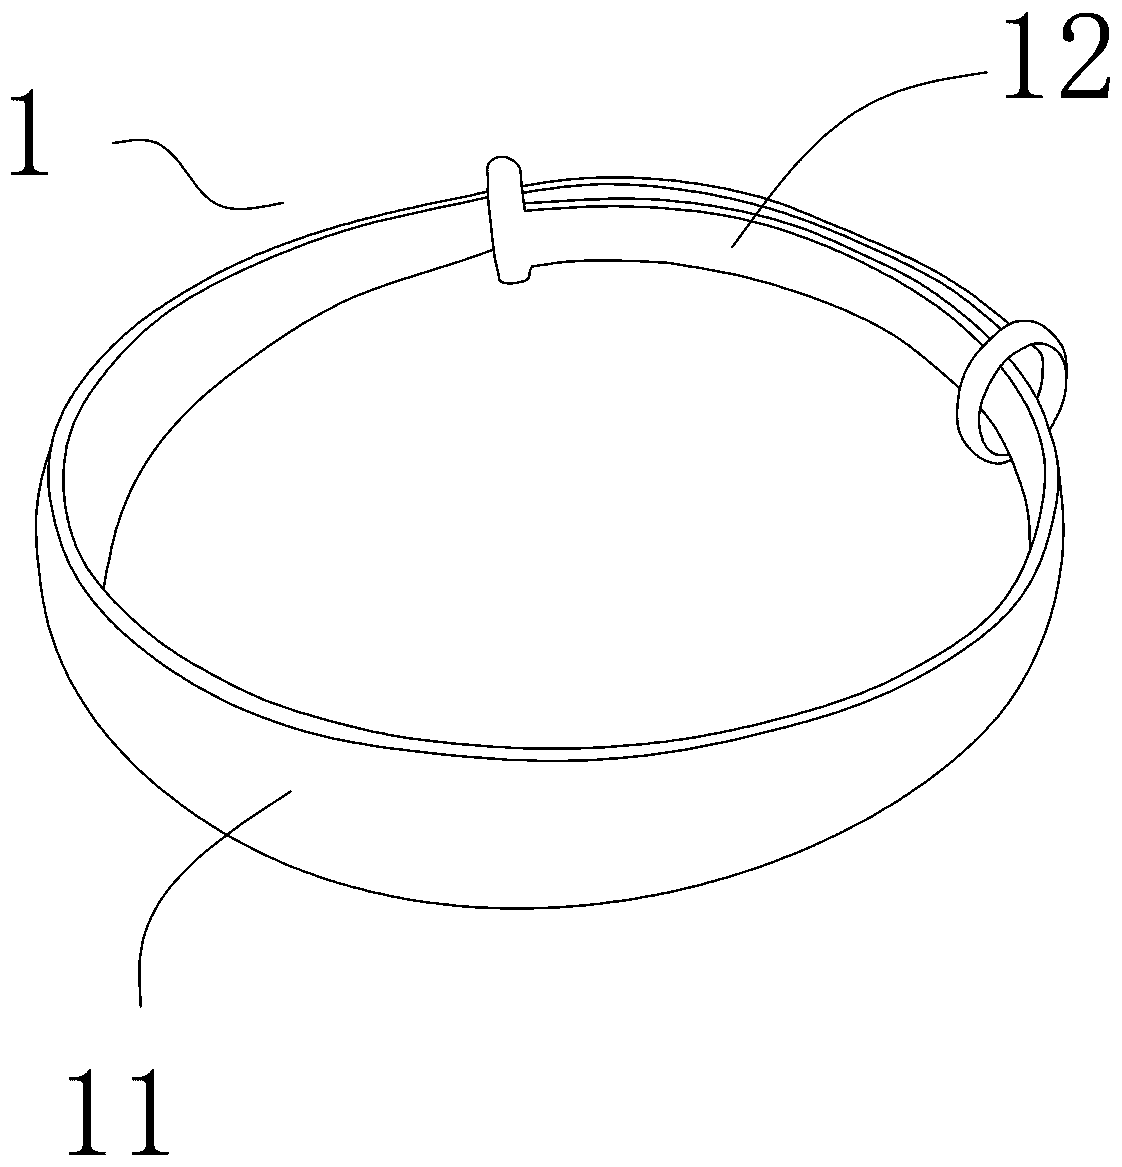 A processing method of an ornament and a bracelet